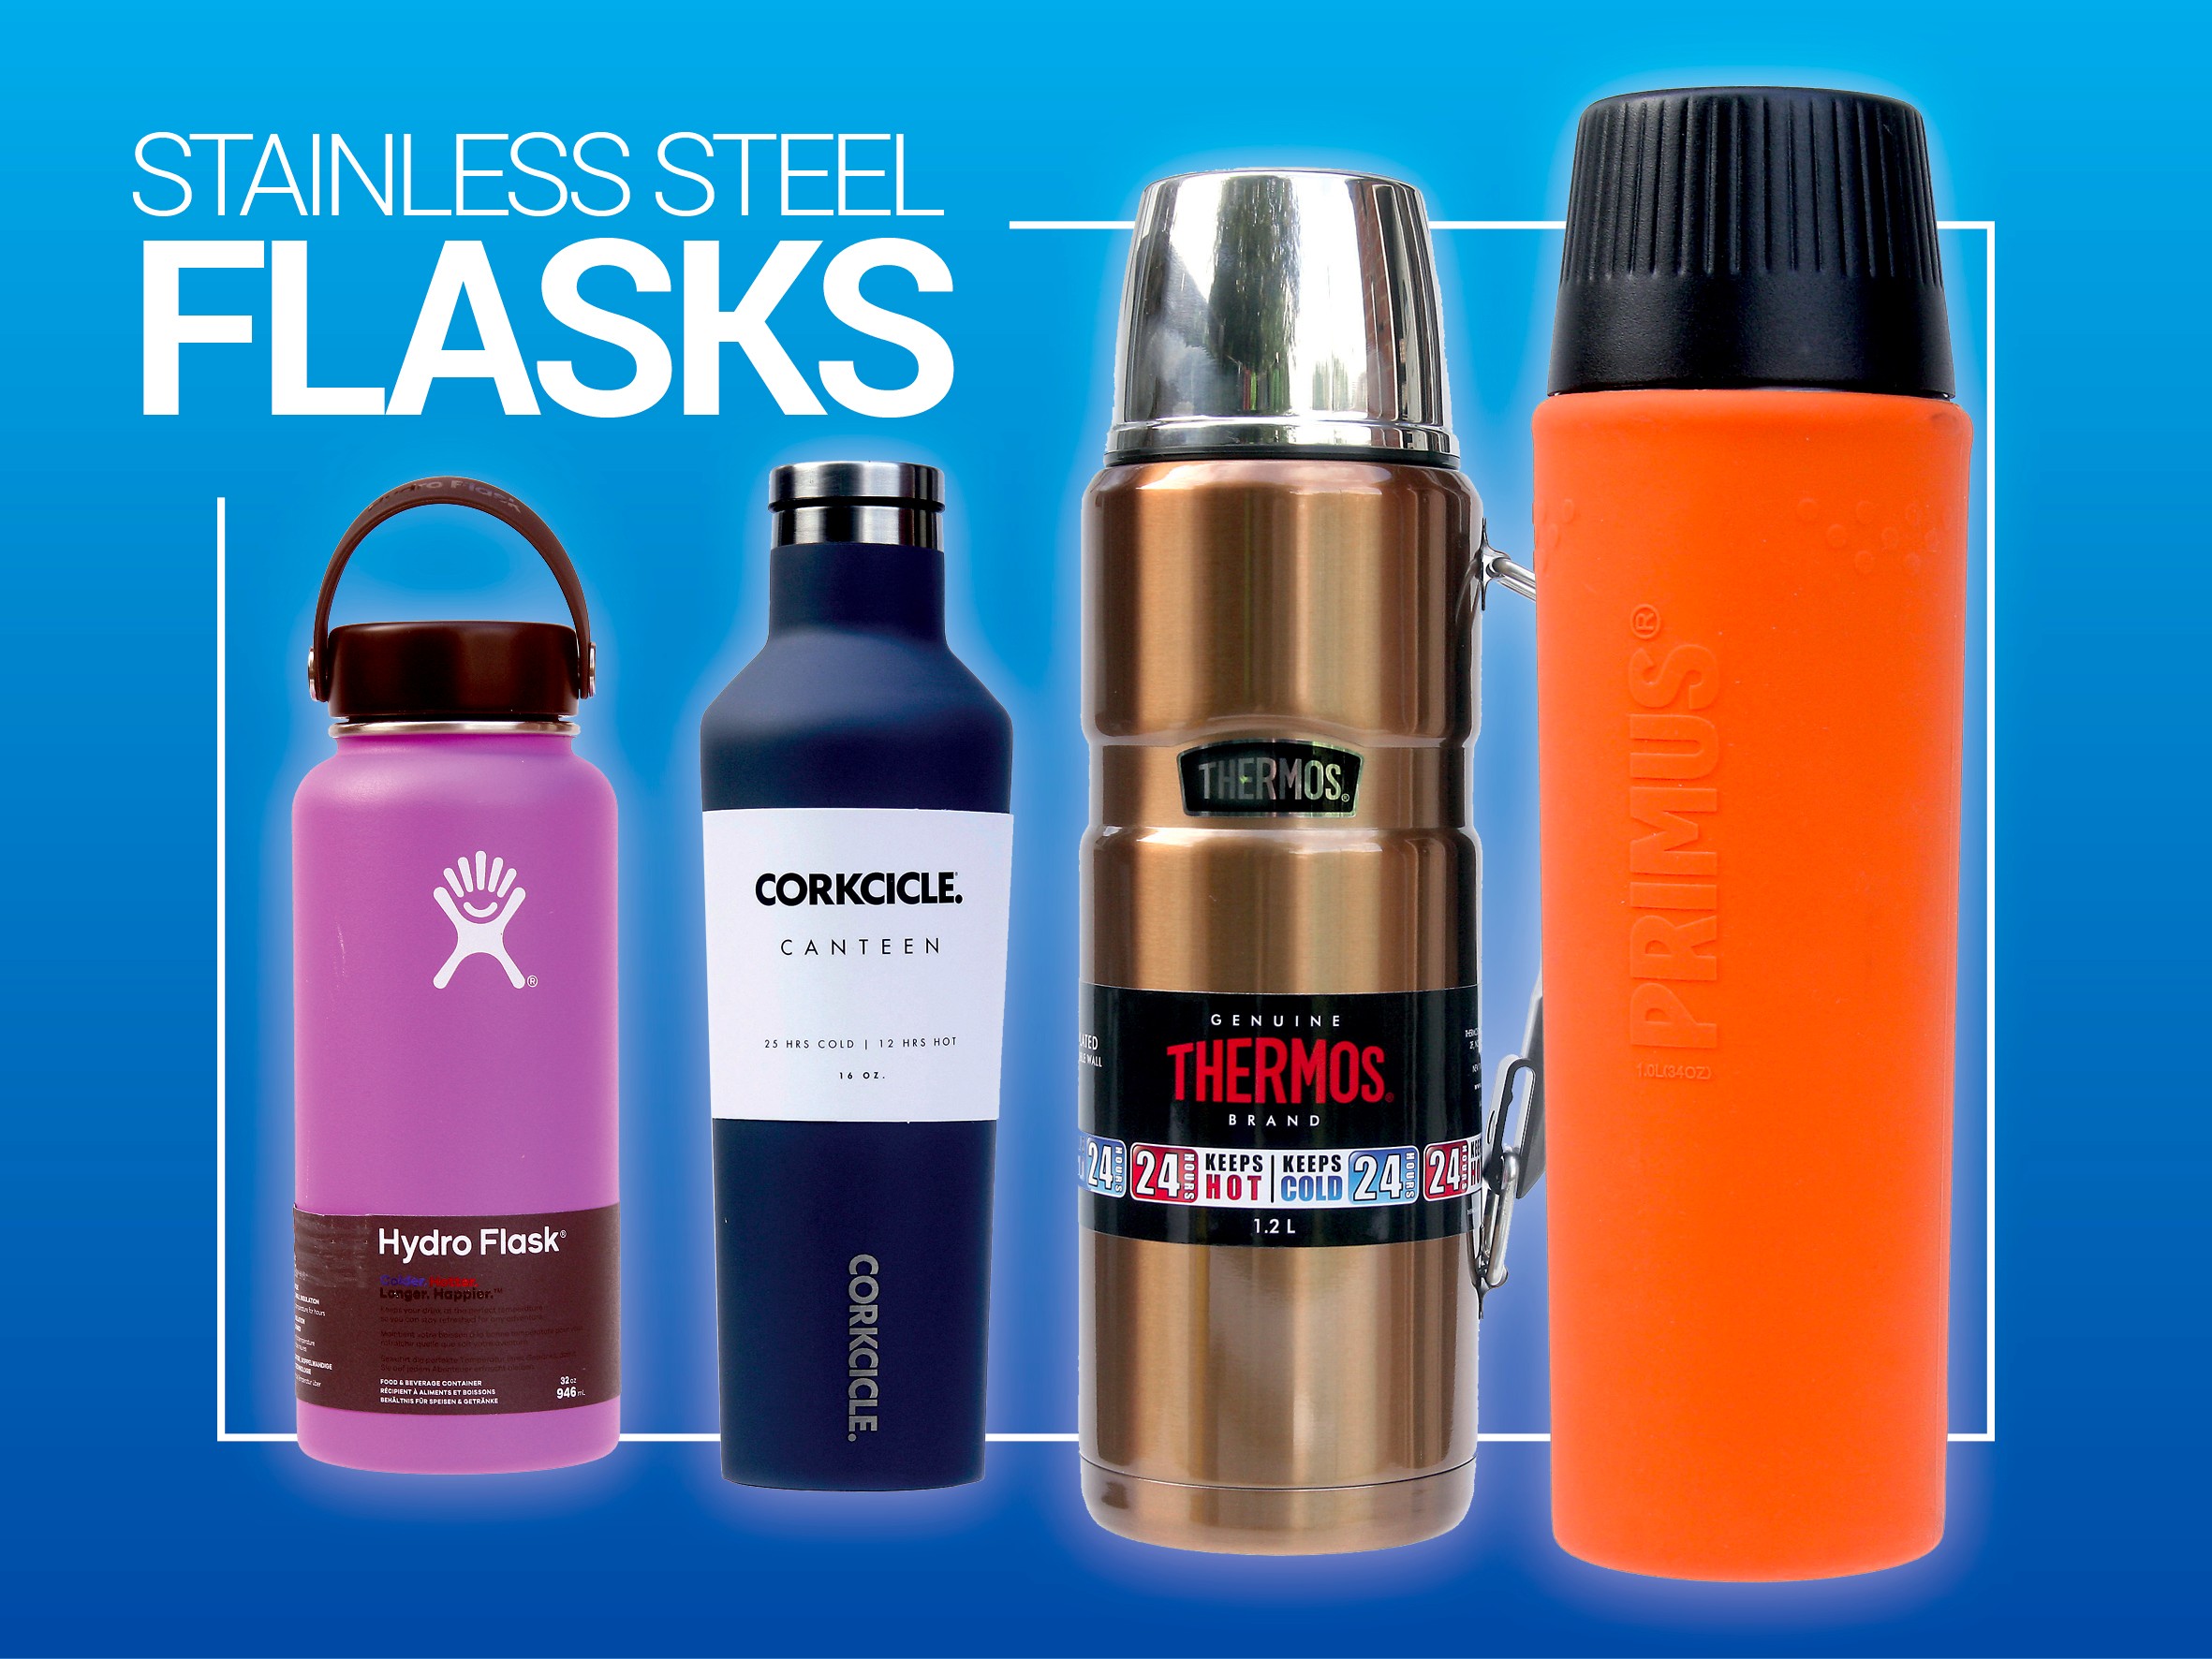 Thermos Glass Lined Flask - ASDA Groceries